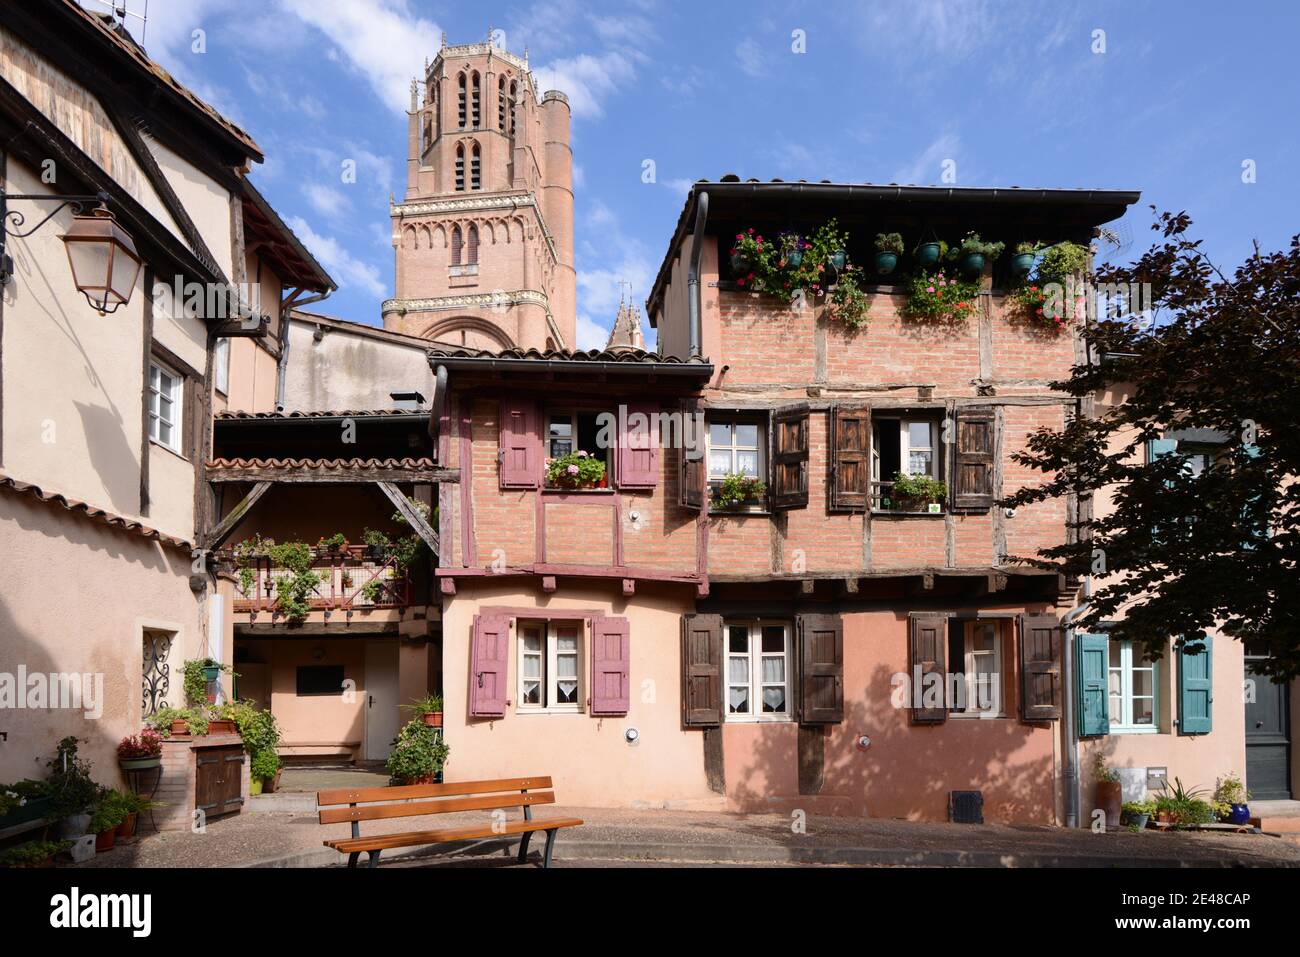 Belfry of Saint Cecilia Cathedral Old Townhouses & Square in the Old Town or Historic District of Albi Tarn France Stock Photo